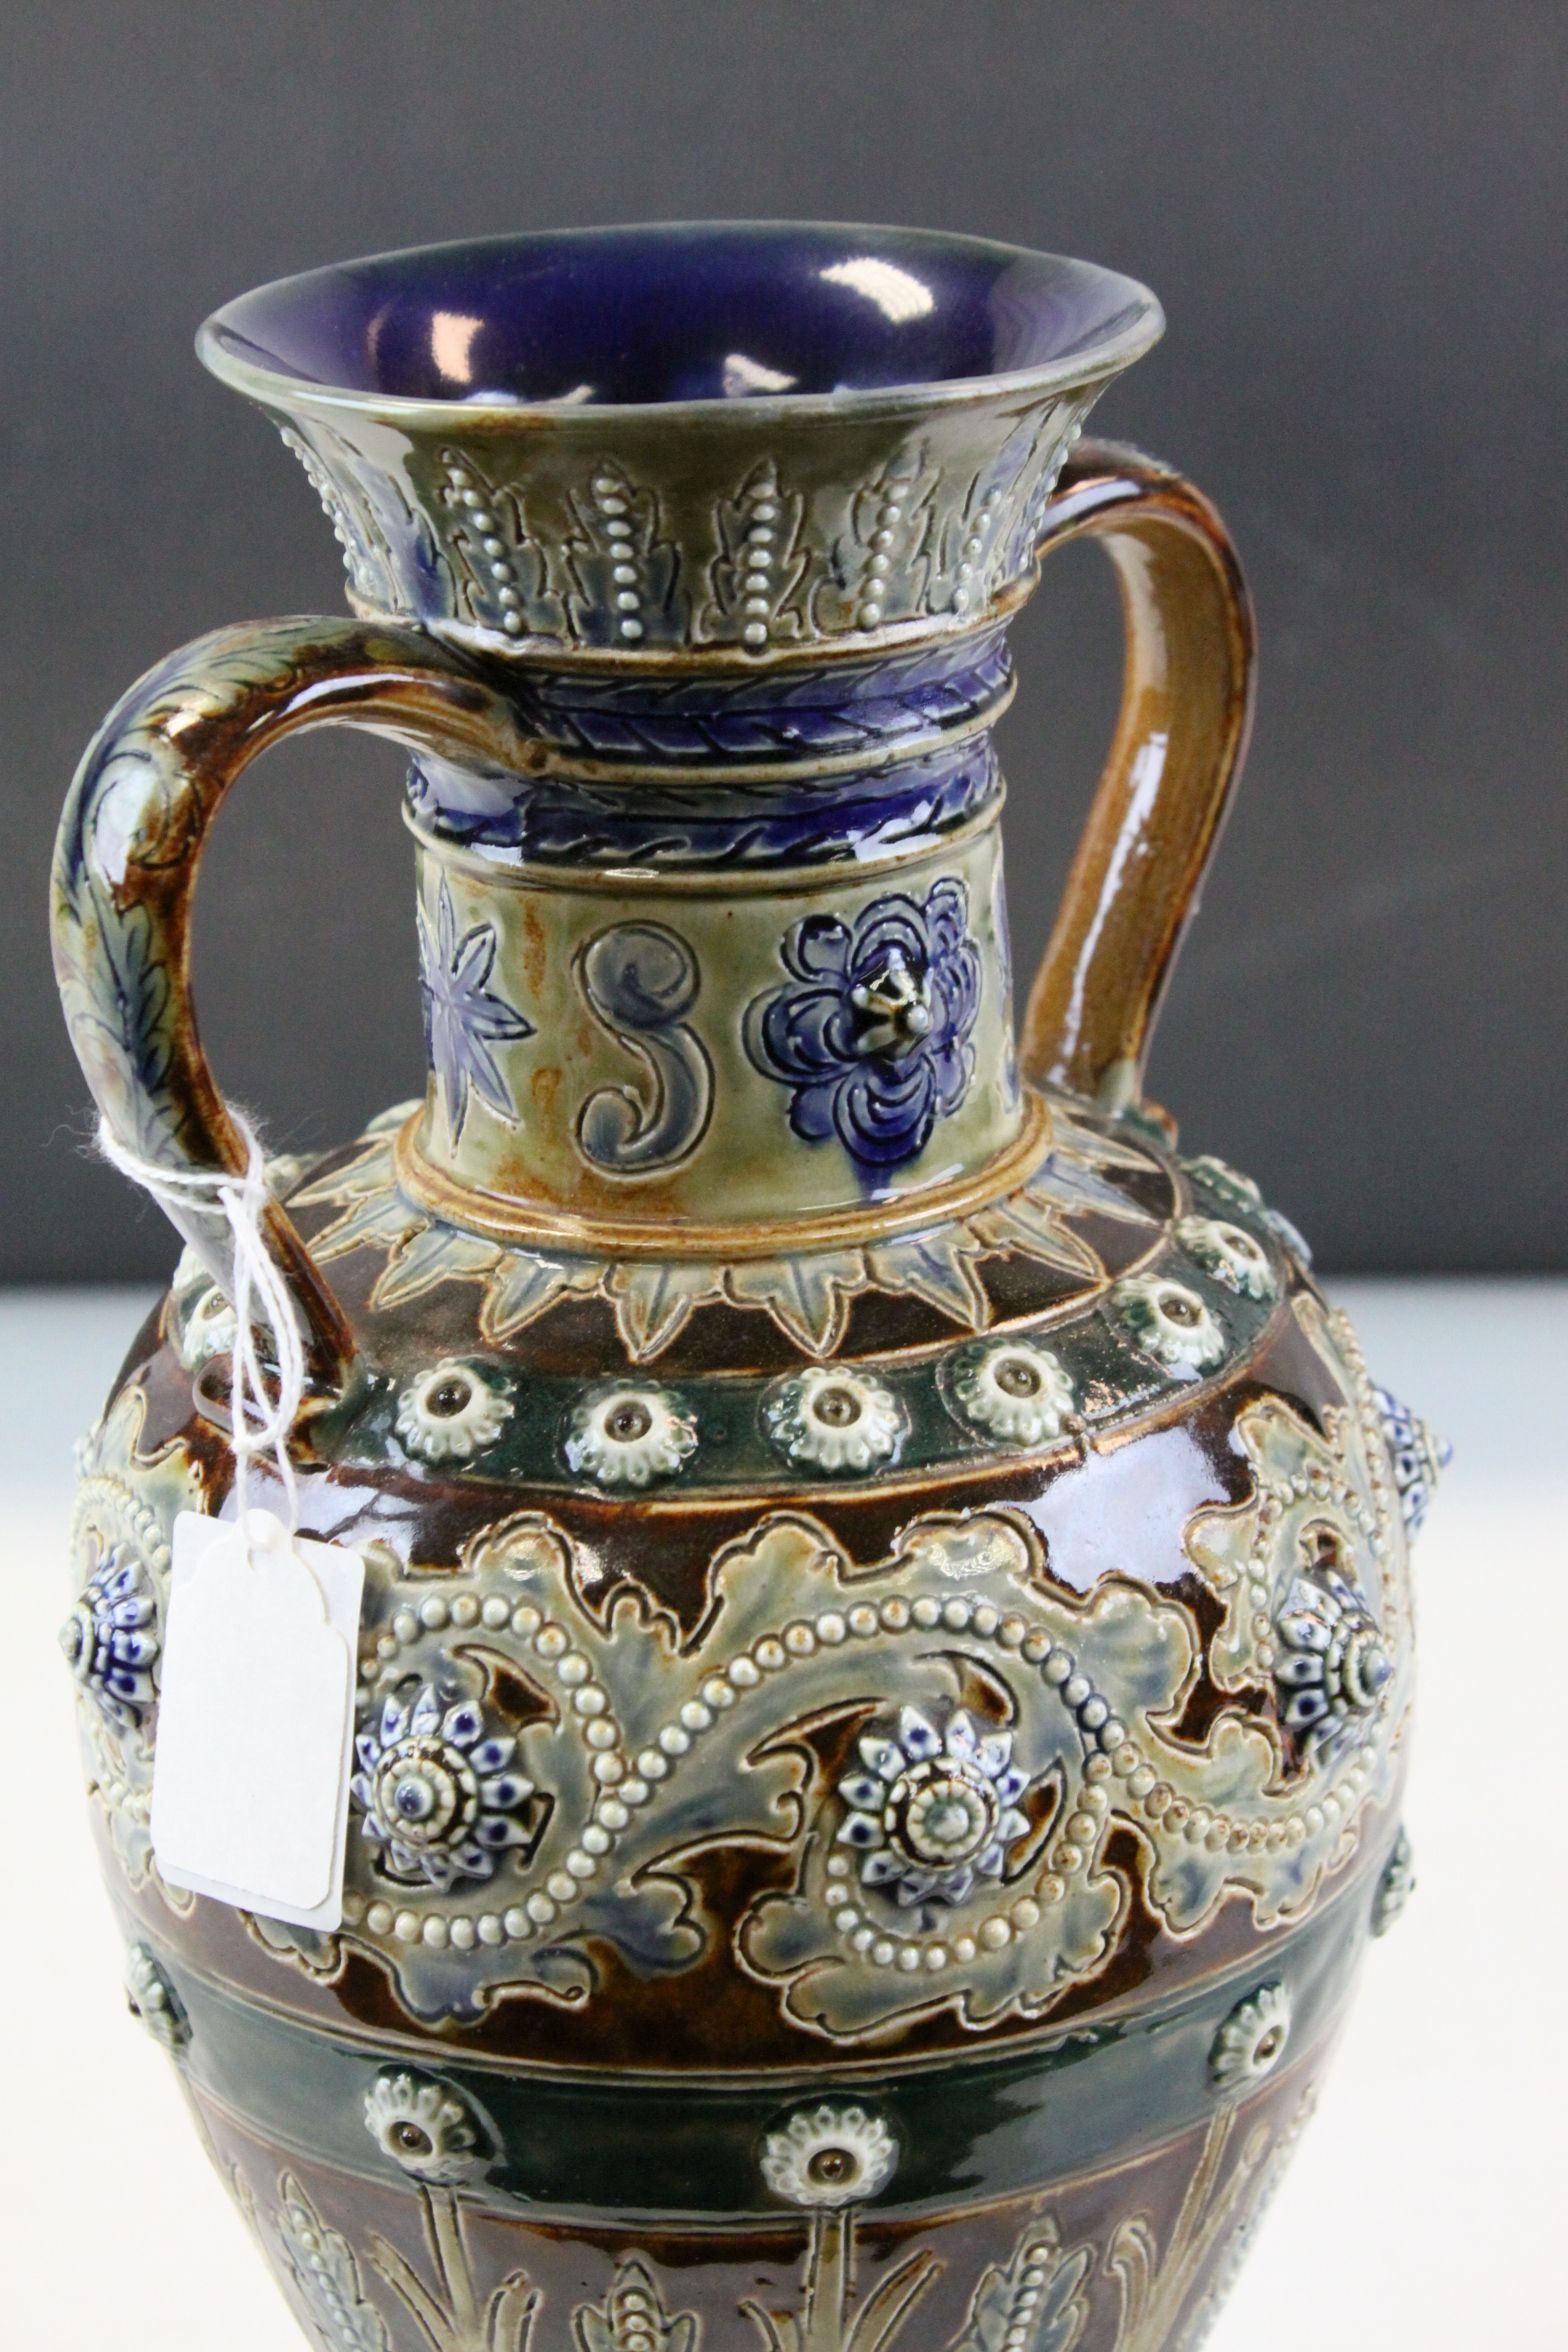 Doulton Lambeth Glazed twin handled Stoneware vase 1874 with incised & applied Floral decoration, - Image 3 of 9